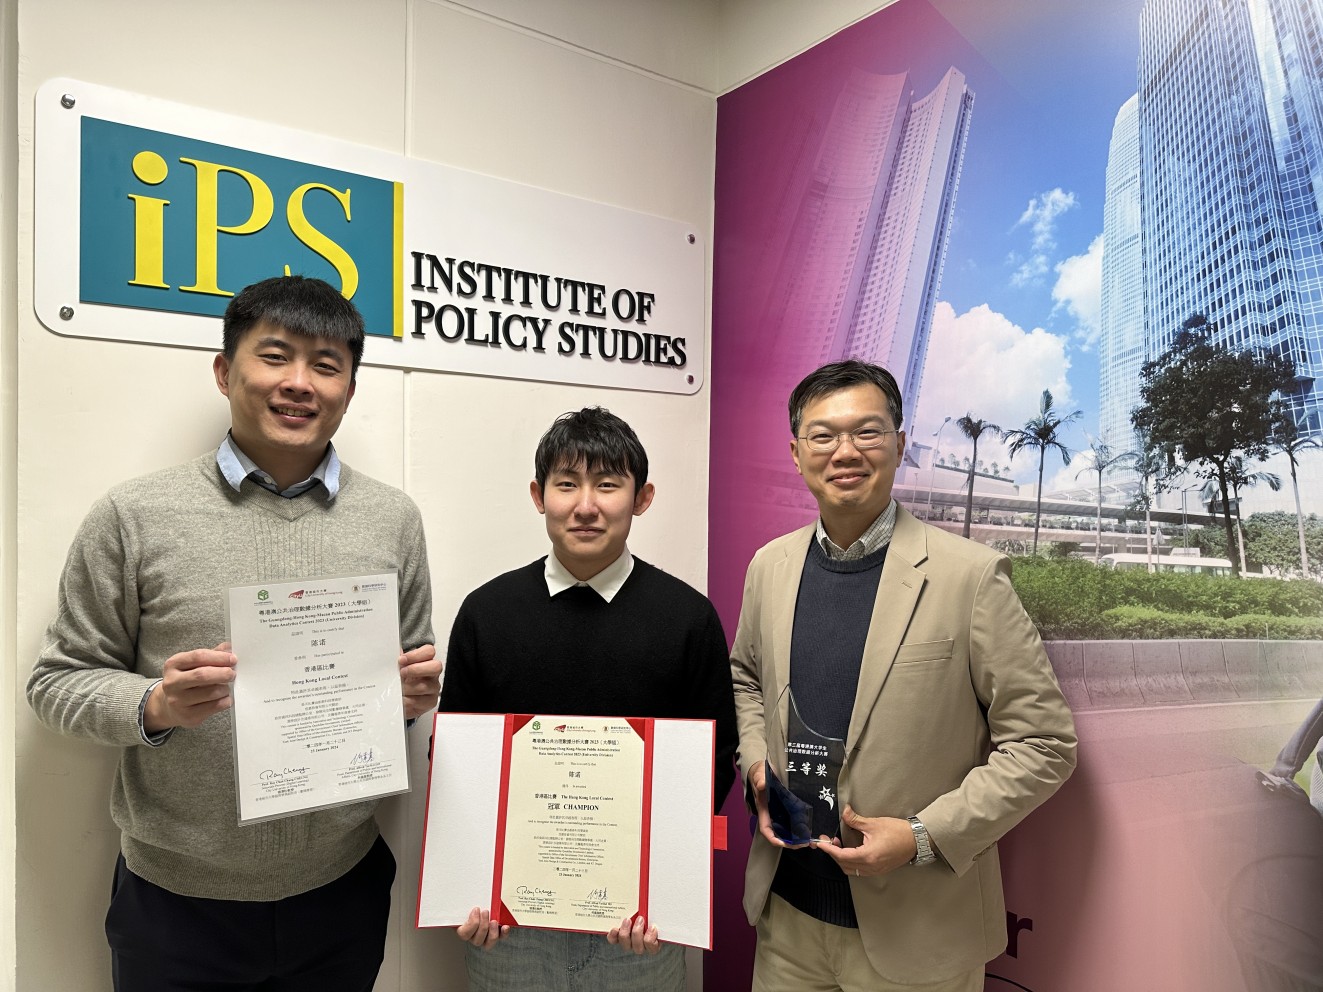 Chen Nuo (middle) with his supervisors at the Institute of Policy Studies, Prof Yau Yung, Professor of the School of Graduate Studies and Professor of Urban Studies of the Department of Sociology and Social Policy (right), and Prof Liang Cong, Research Assistant Professor of the School of Graduate Studies (left)